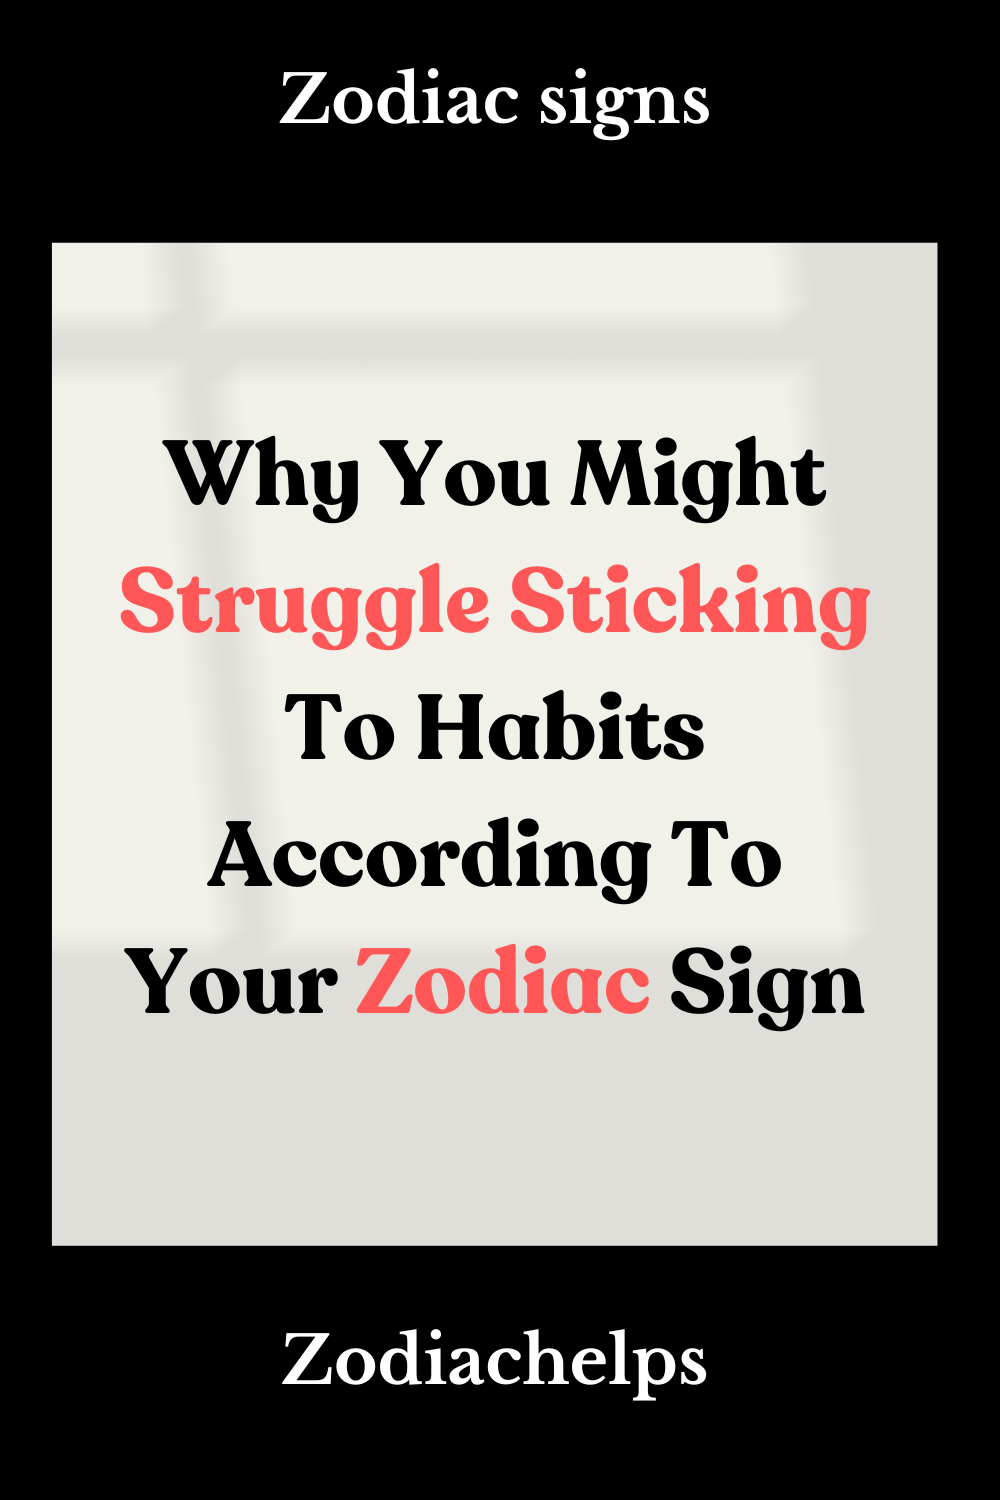 Why You Might Struggle Sticking To Habits According To Your Zodiac Sign